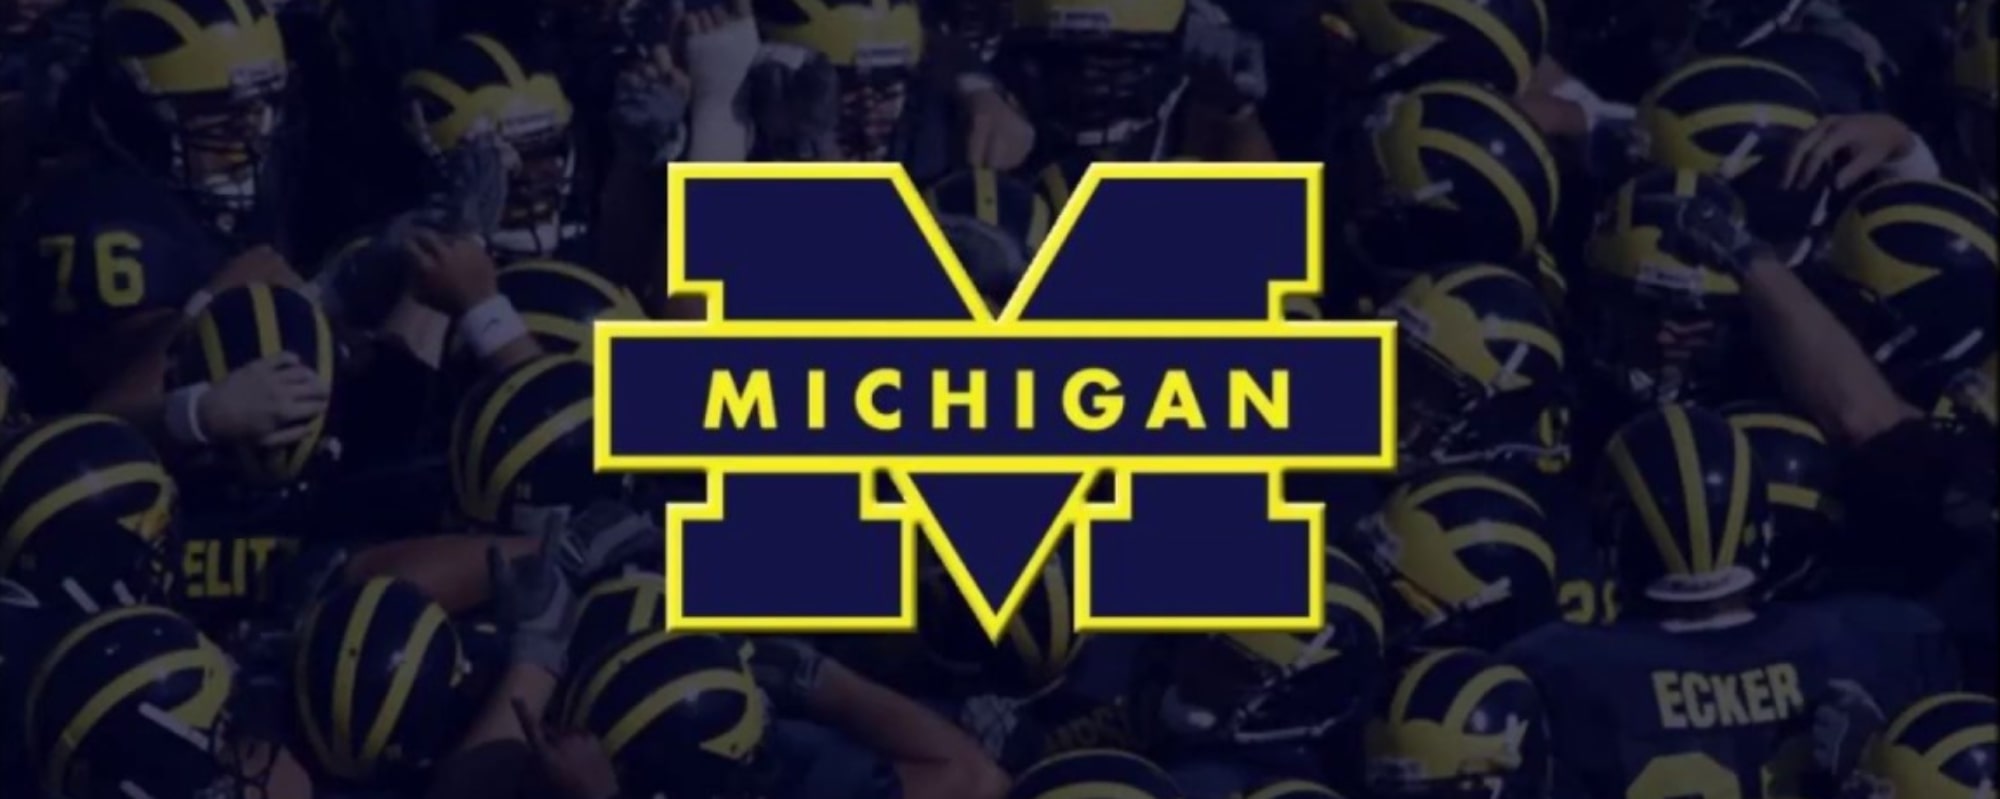 CFP National Championship Halftime Show: All You Need to Know About the Michigan Wolverines’ Fight Song